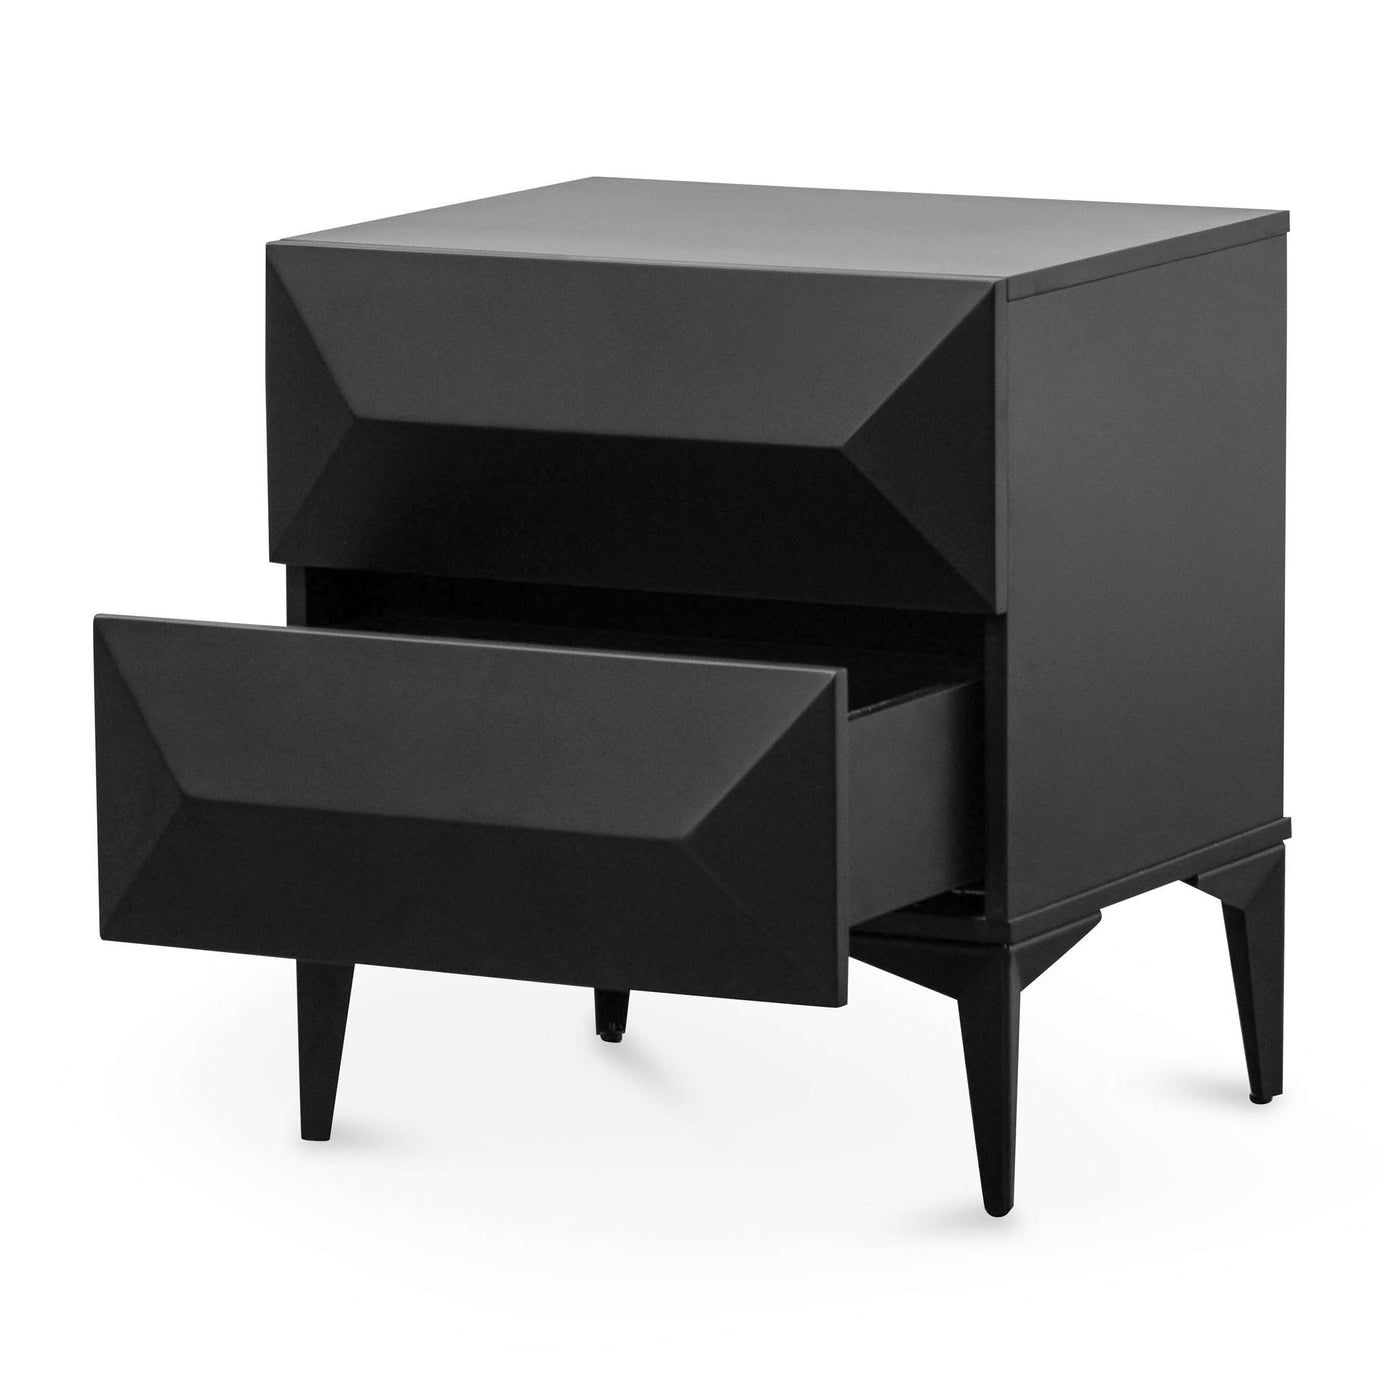 Wooden Side Table - Matte Black with Black Legs